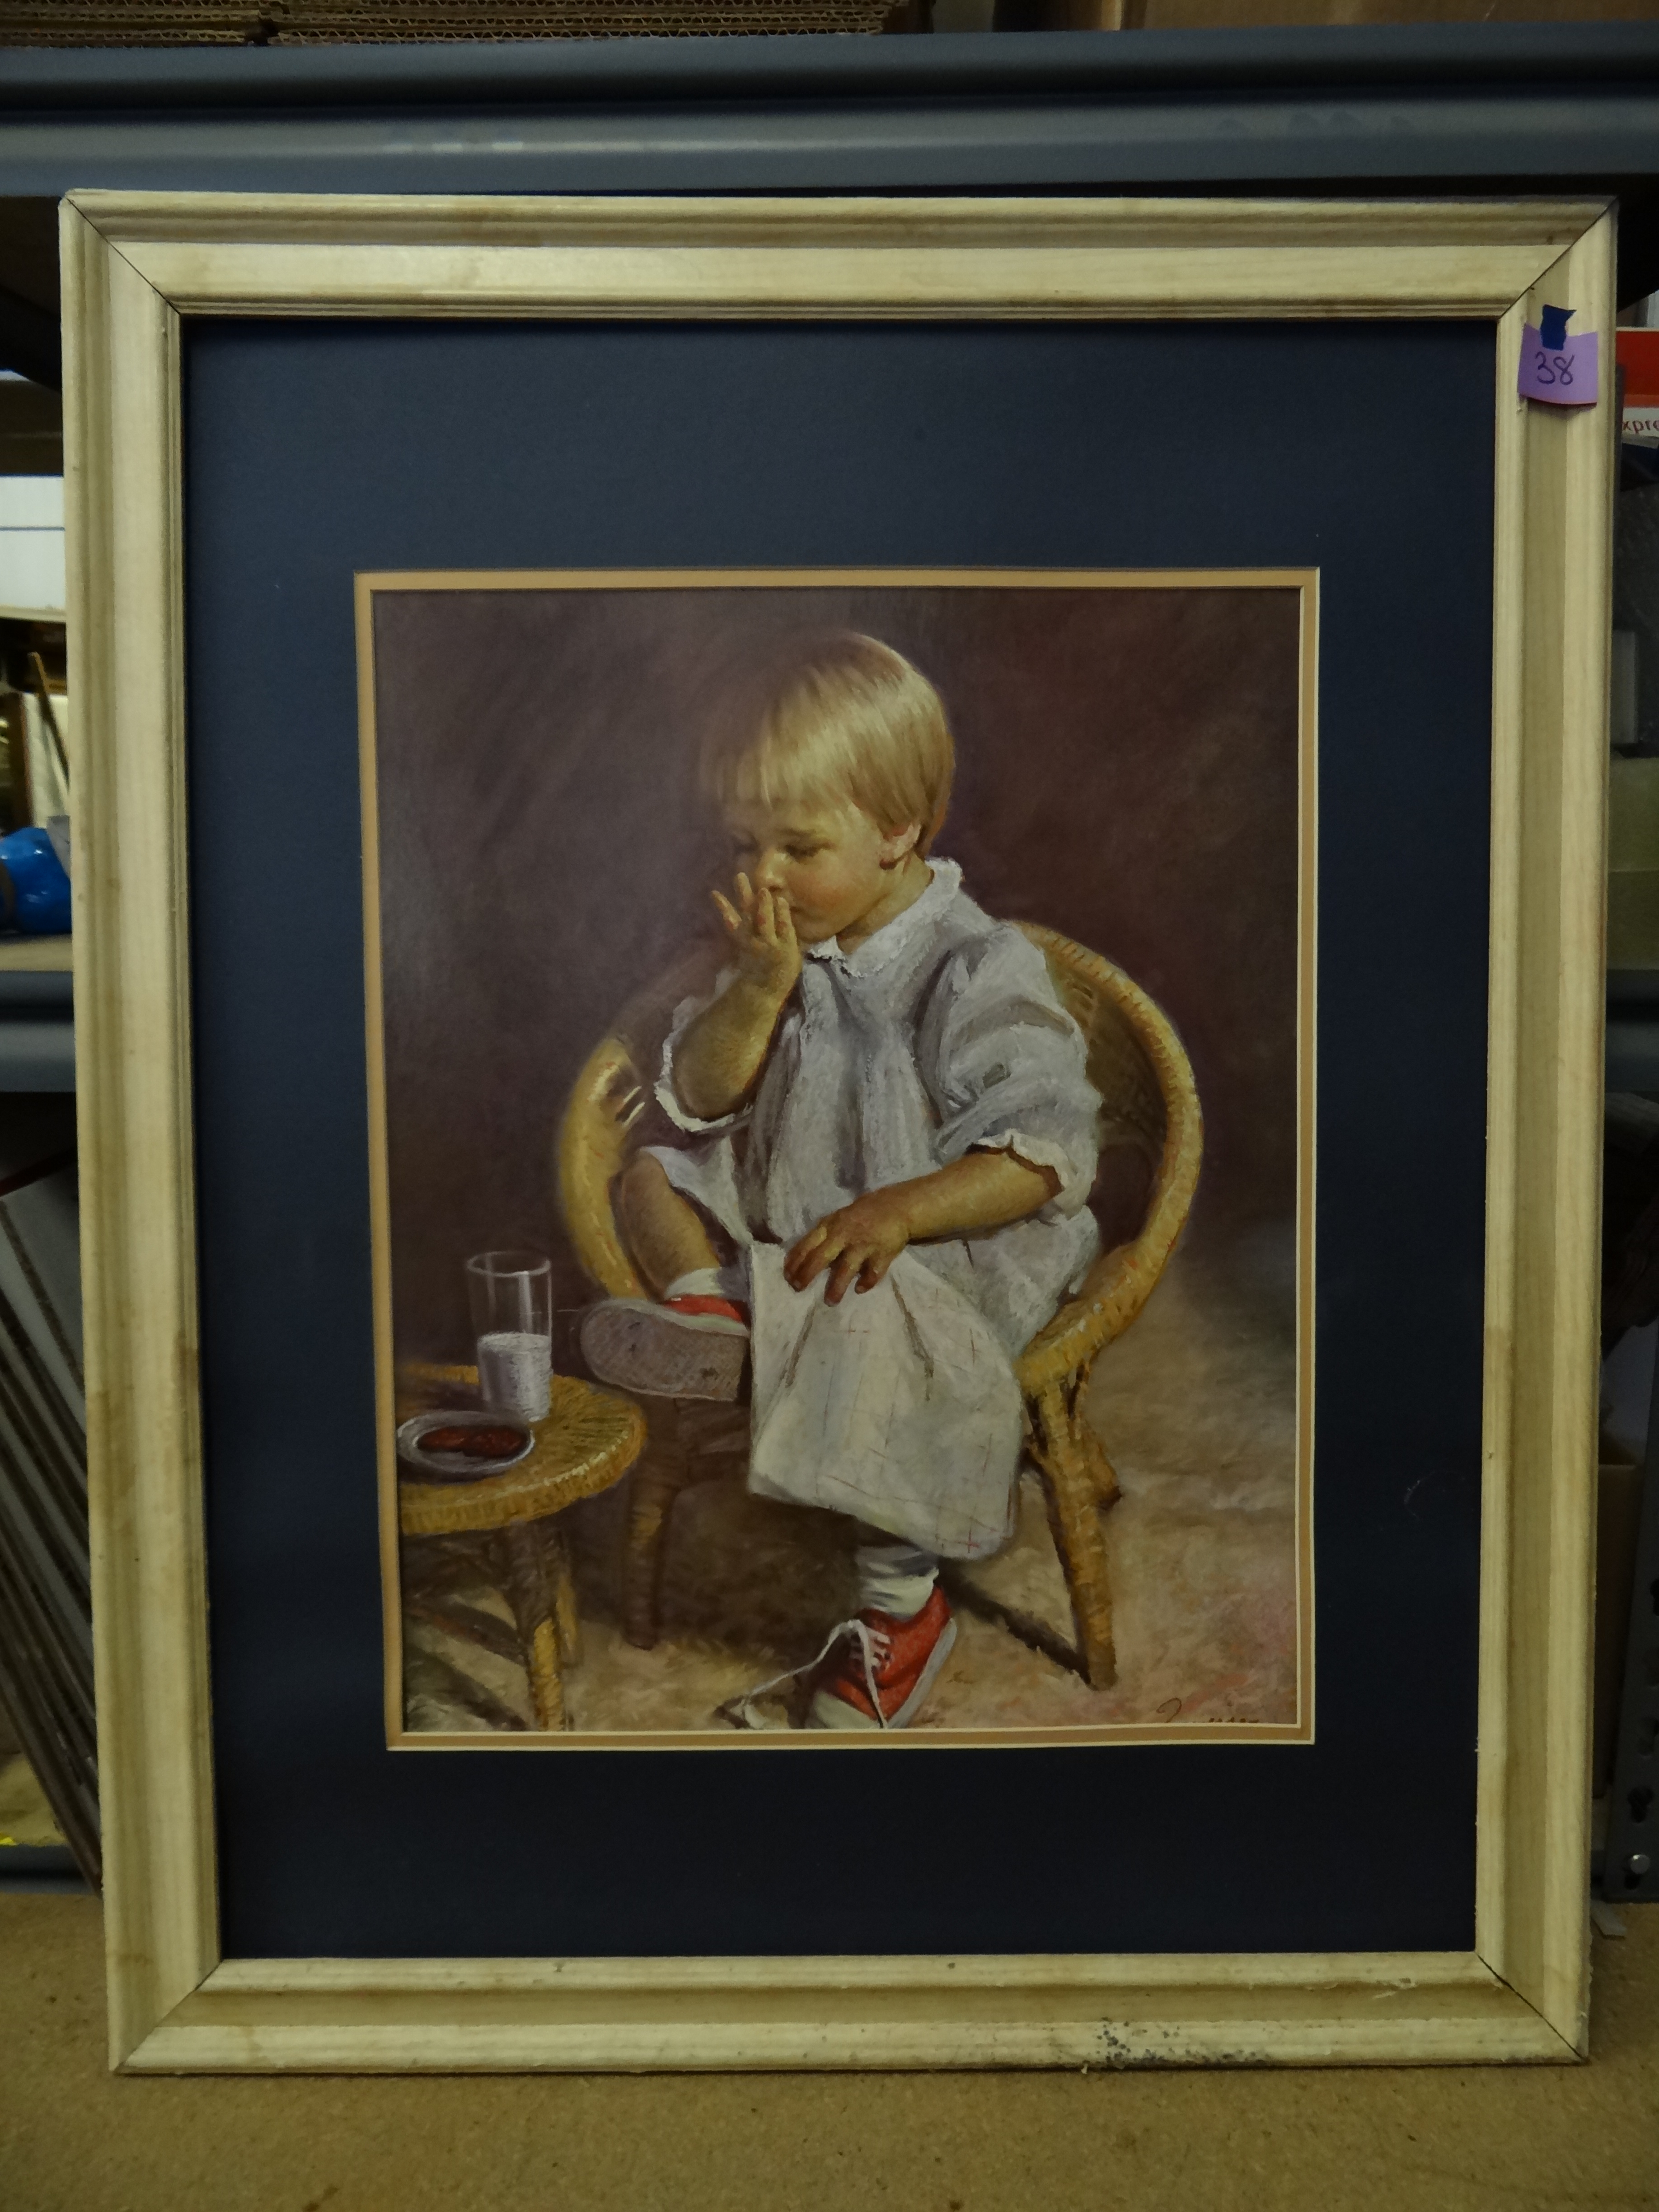 38-Framed & Matted (no glass) Print of Little Boy Eating Cookies & Milk (see pics for measurements)